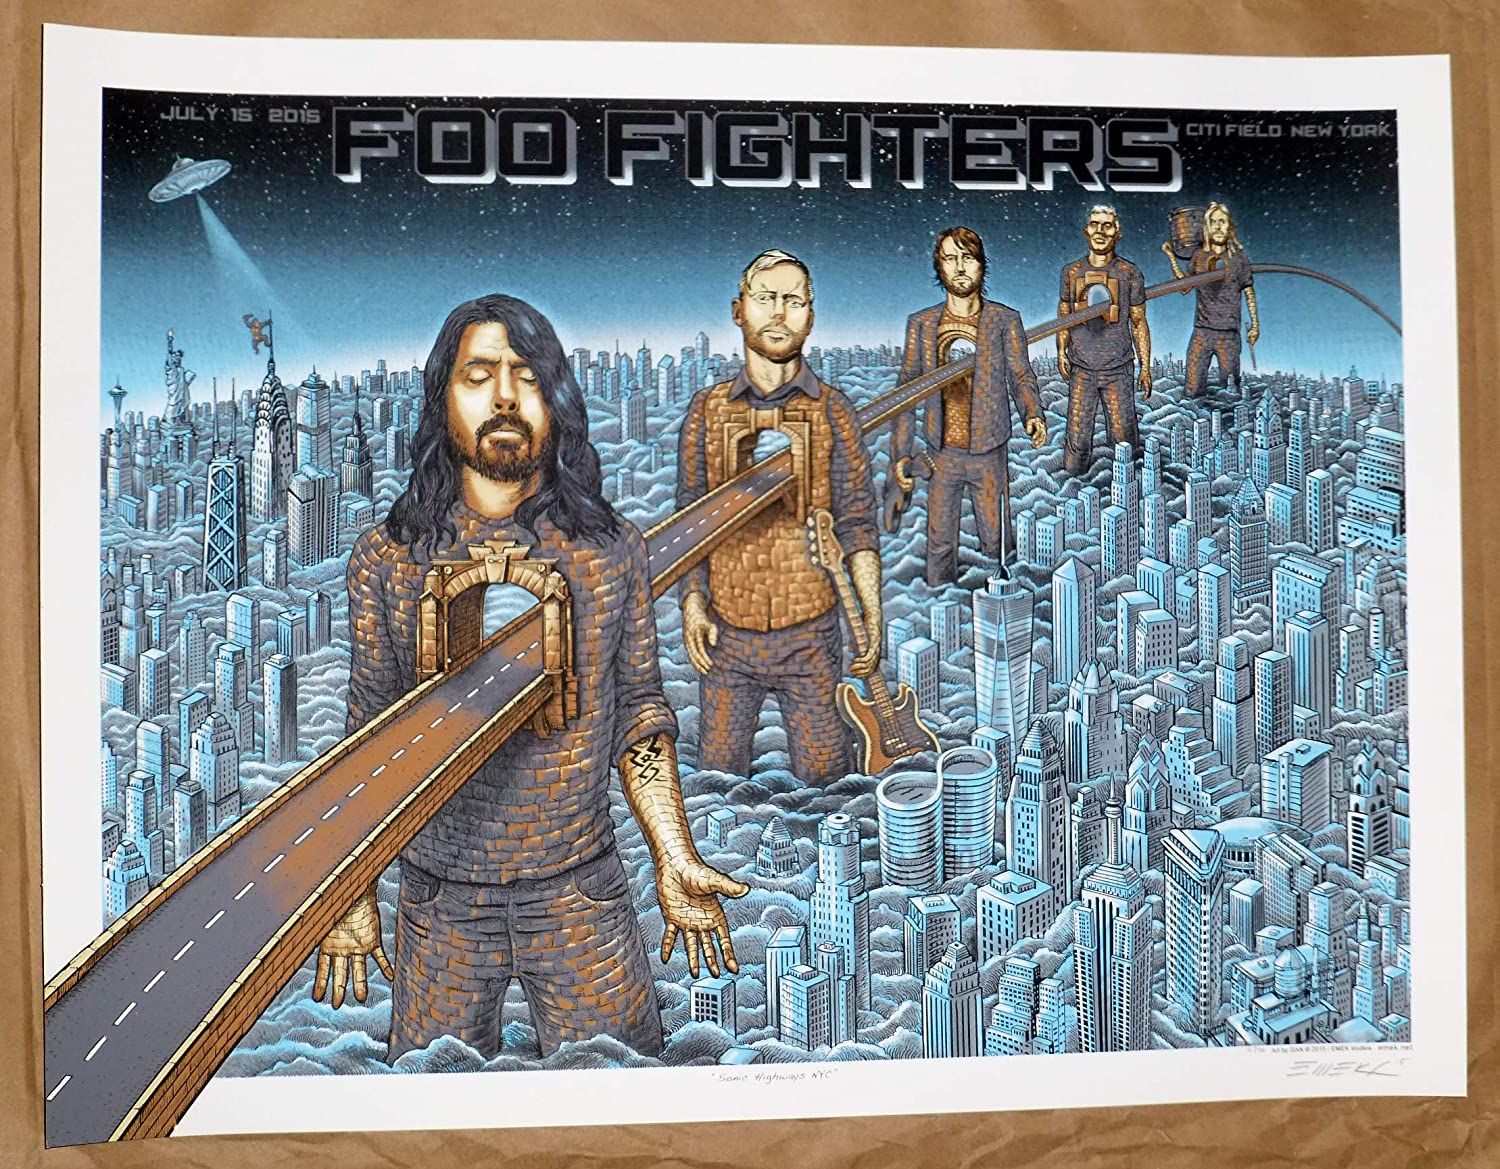 Foo Fighters Citi Field 2016 Concert Poster